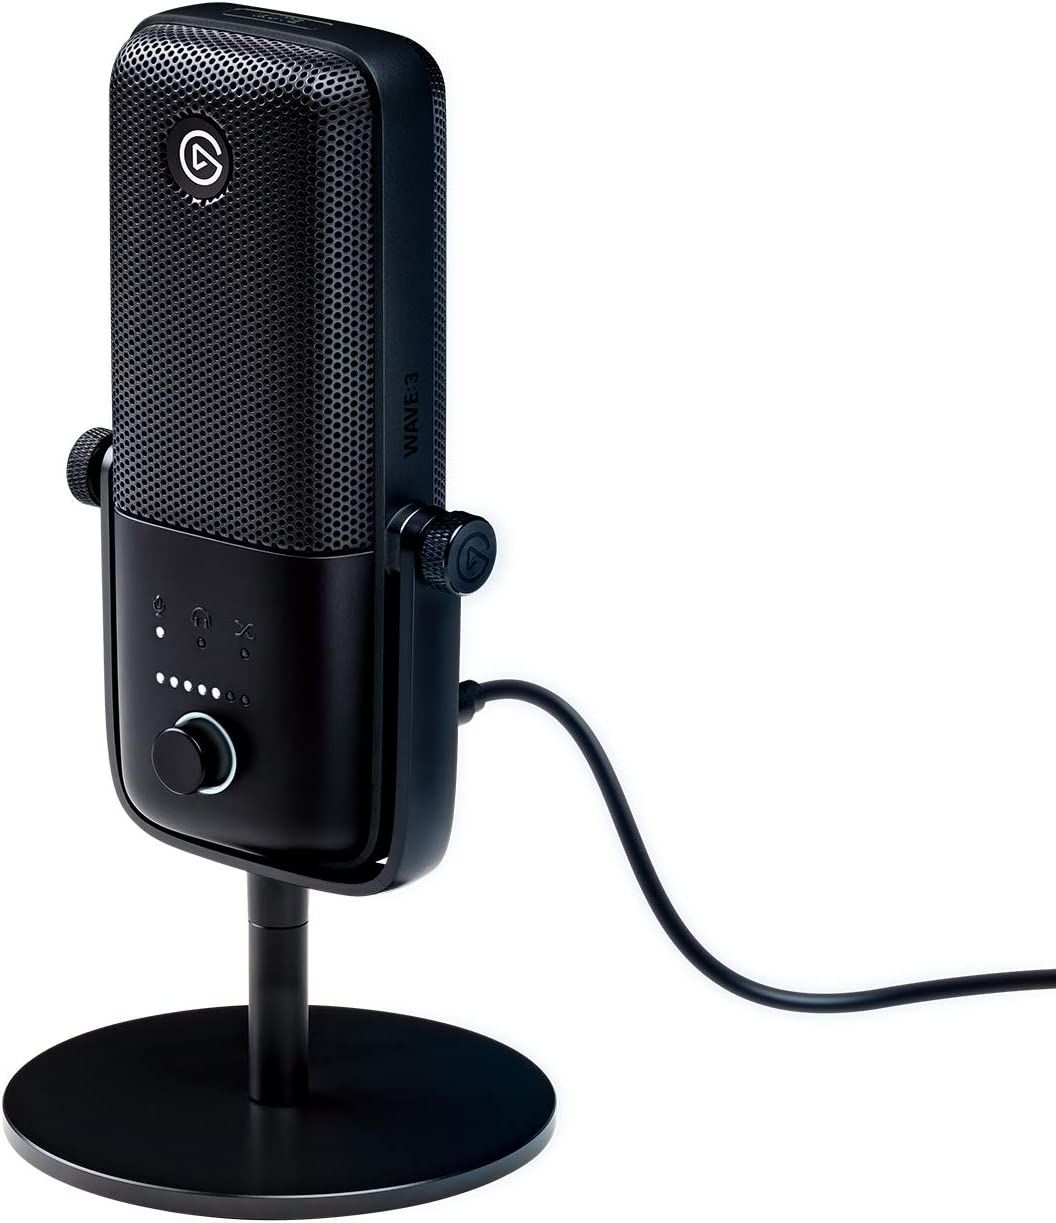 Razer Seiren V2 X USB Condenser Microphone for Streaming and Gaming on PC:  Supercardioid Pickup Pattern - Integrated Digital Limiter - Mic Monitoring  and Gain Control - Built-in Shock Absorber 